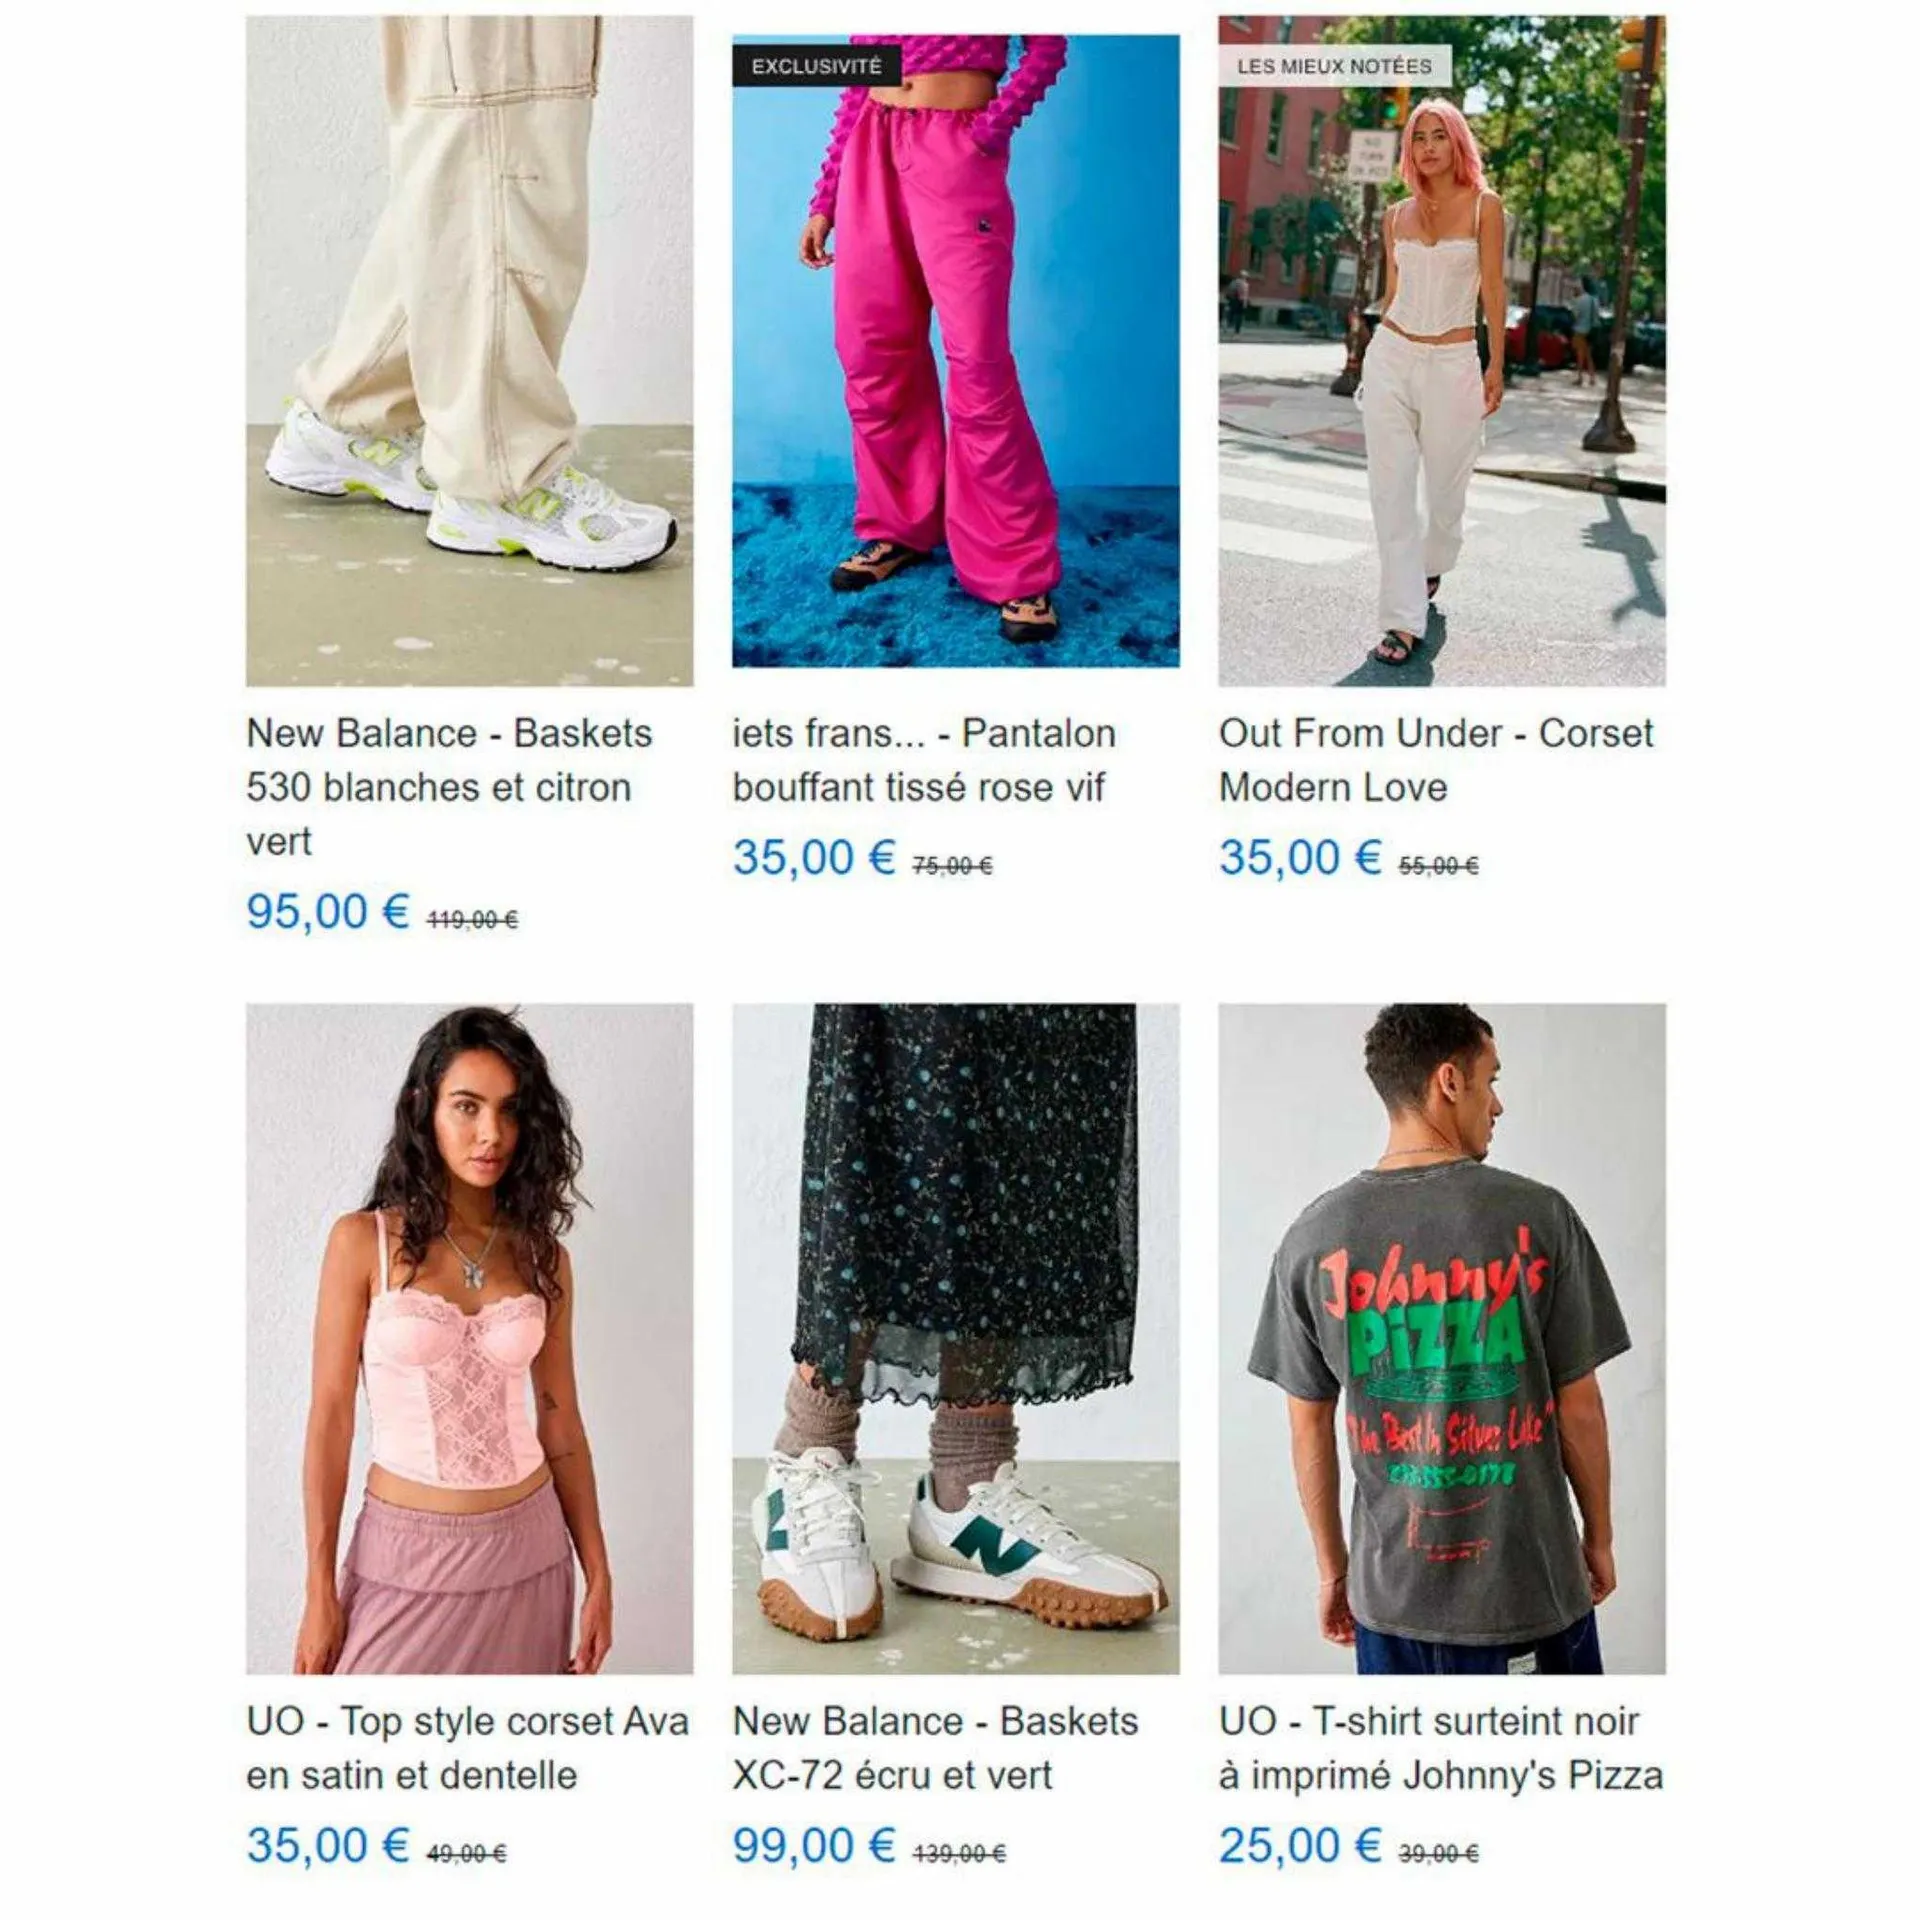 Catalogue Urban Outfitters - 12